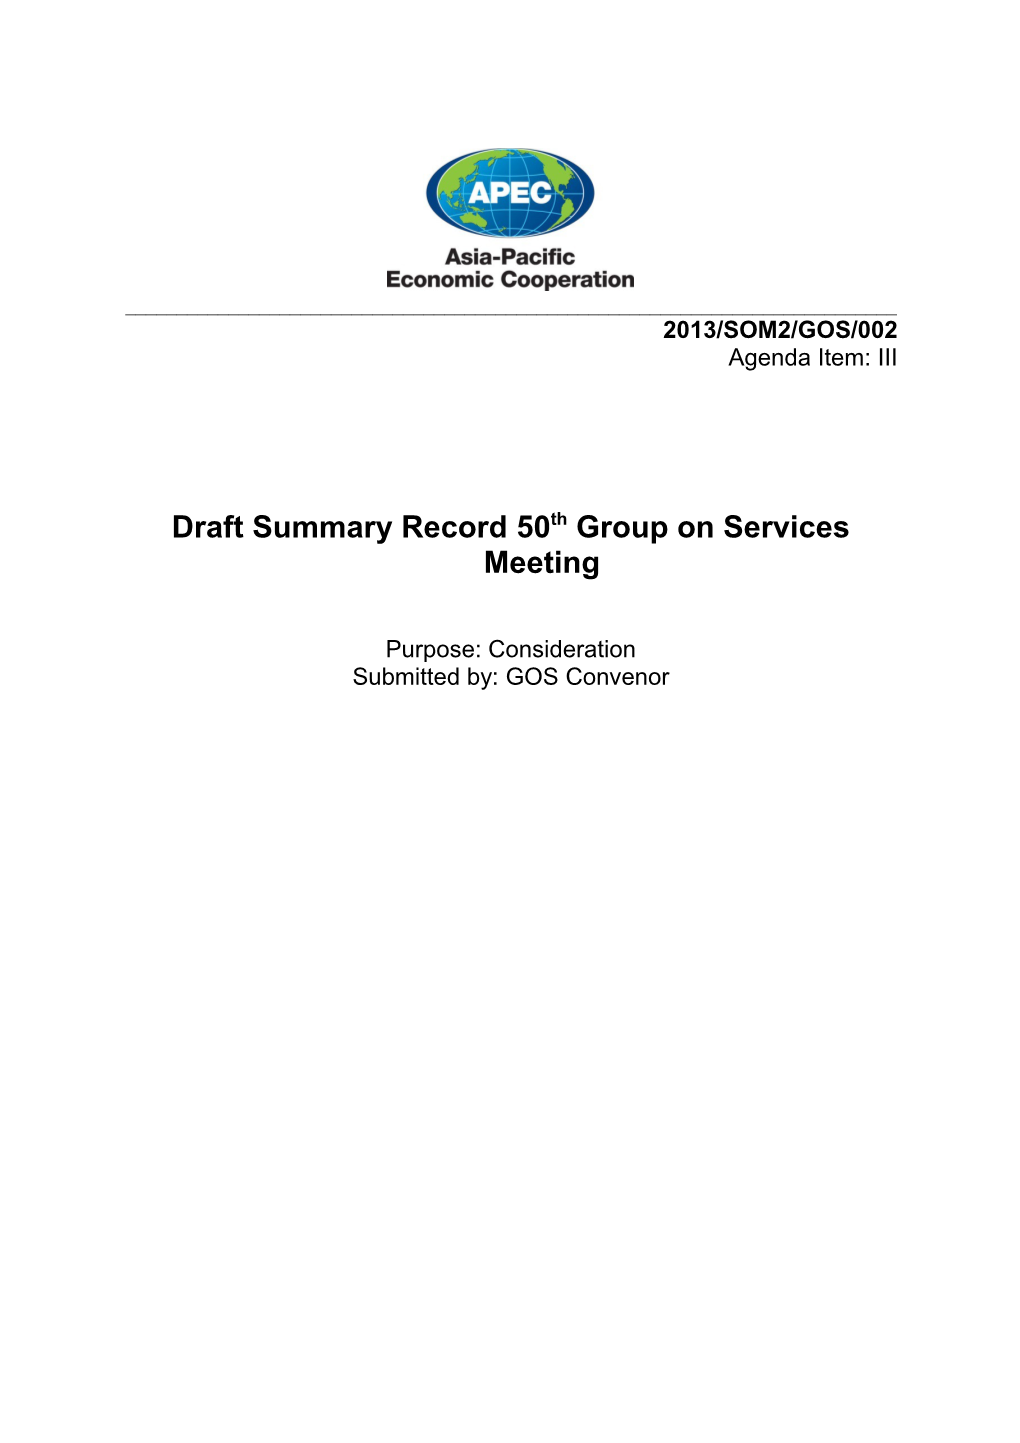 Draft Summary Record50th Group on Services Meeting